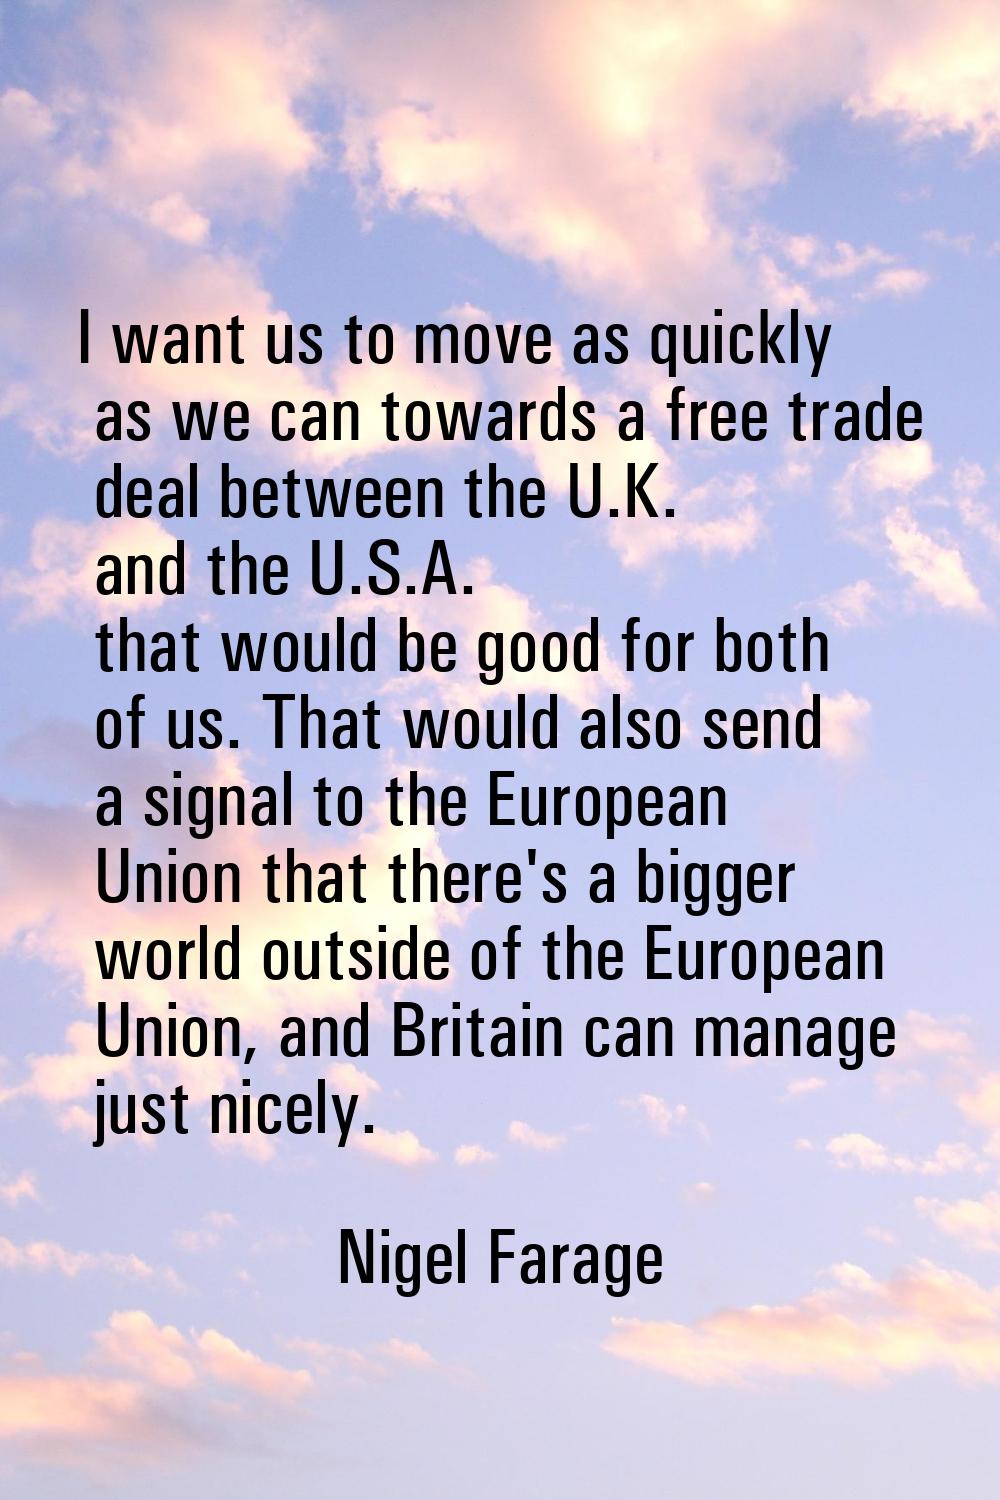 I want us to move as quickly as we can towards a free trade deal between the U.K. and the U.S.A. th